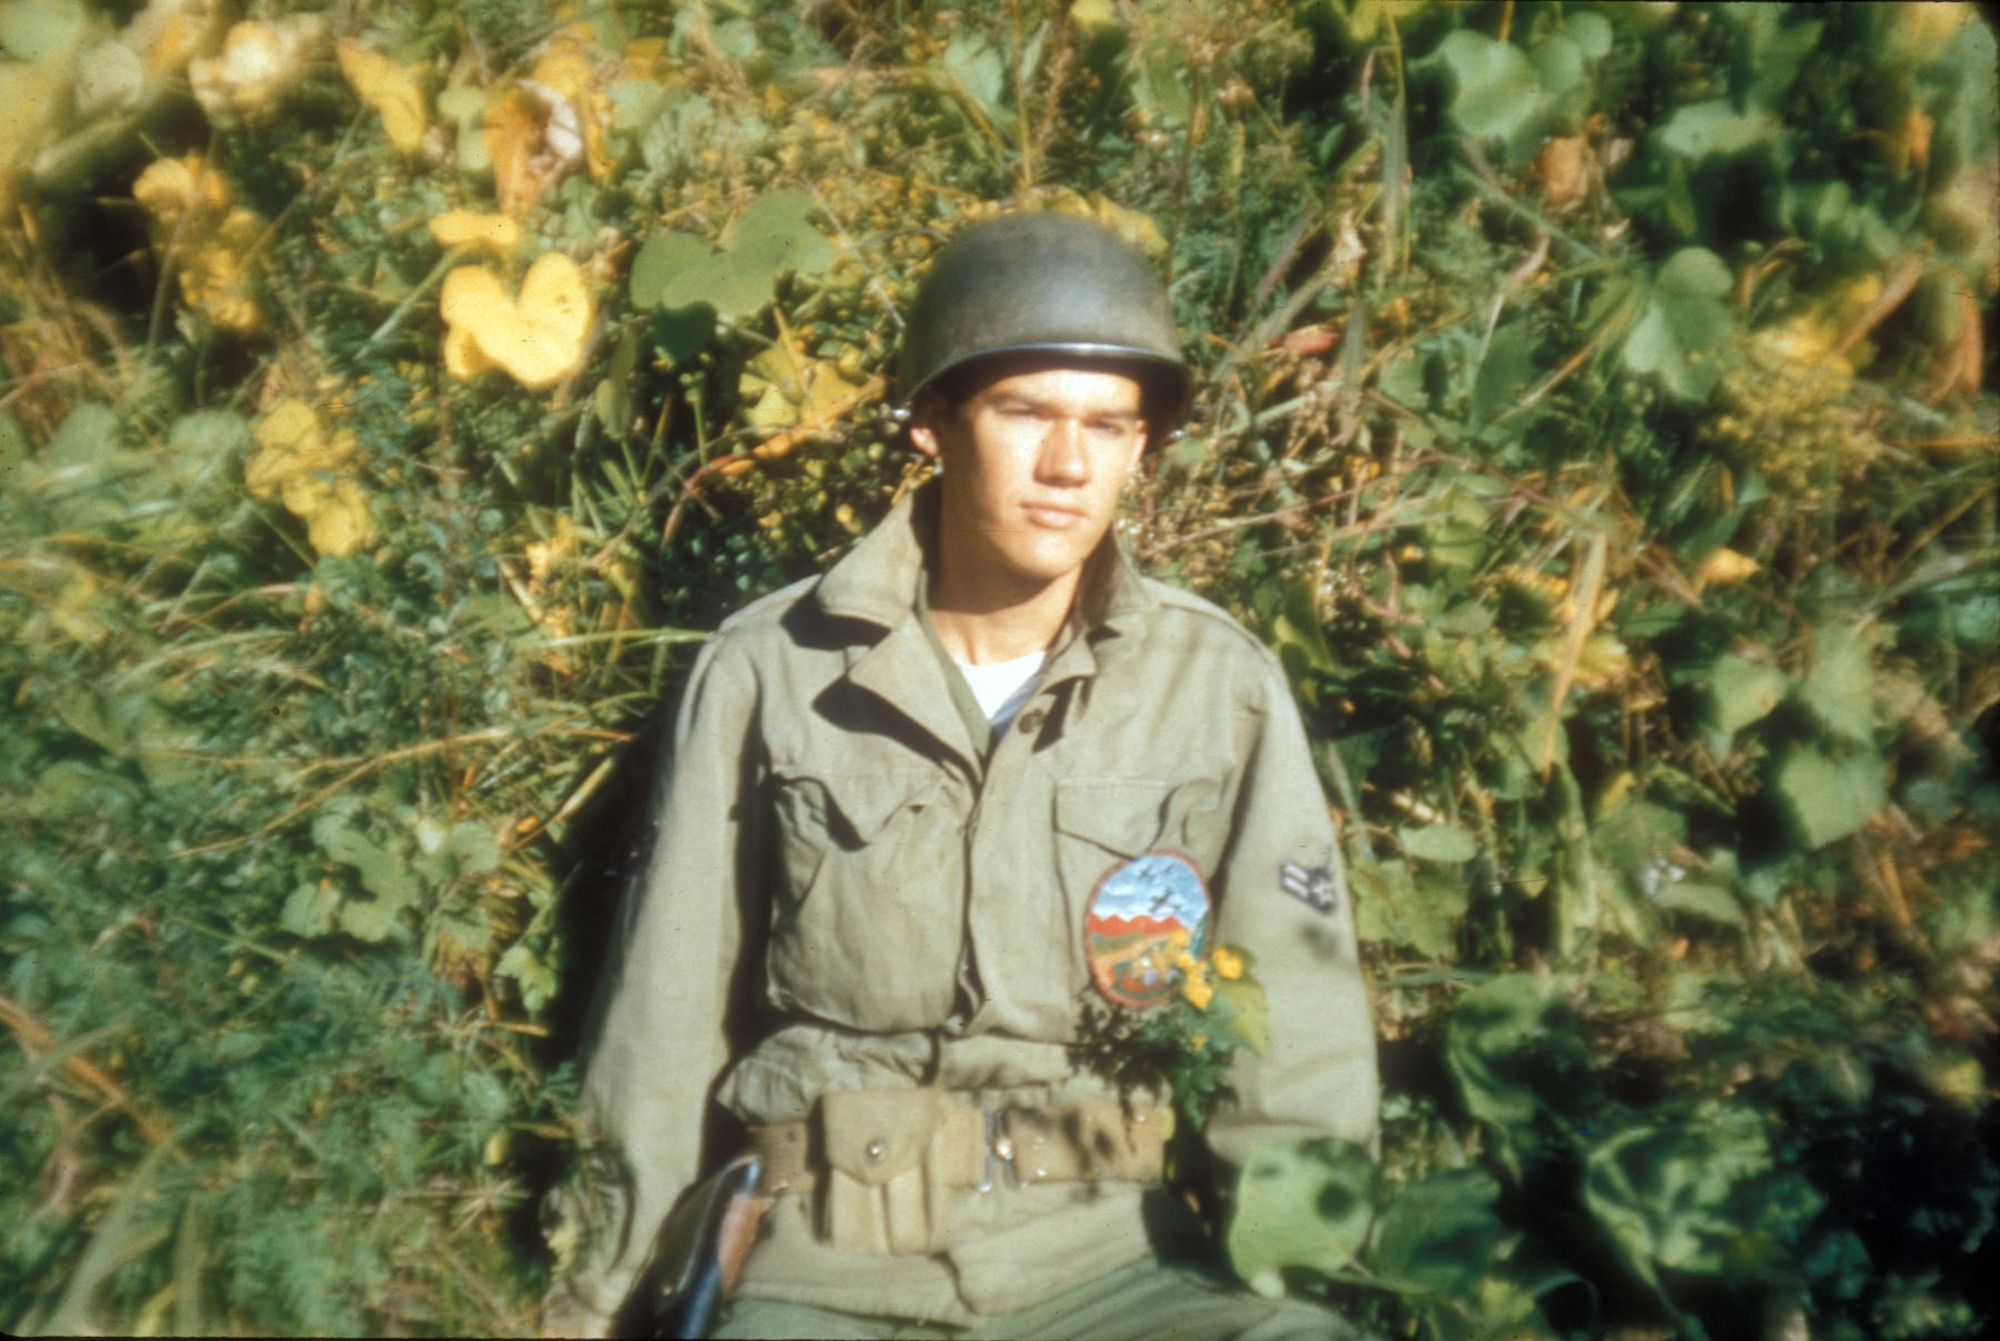 Airmen in Tactical Air Control Parties (TACP), like Airman 2nd Class Jerry Allen, pictured here, spent most of their time at the front lines with ground troops. (U.S. Air Force photo)